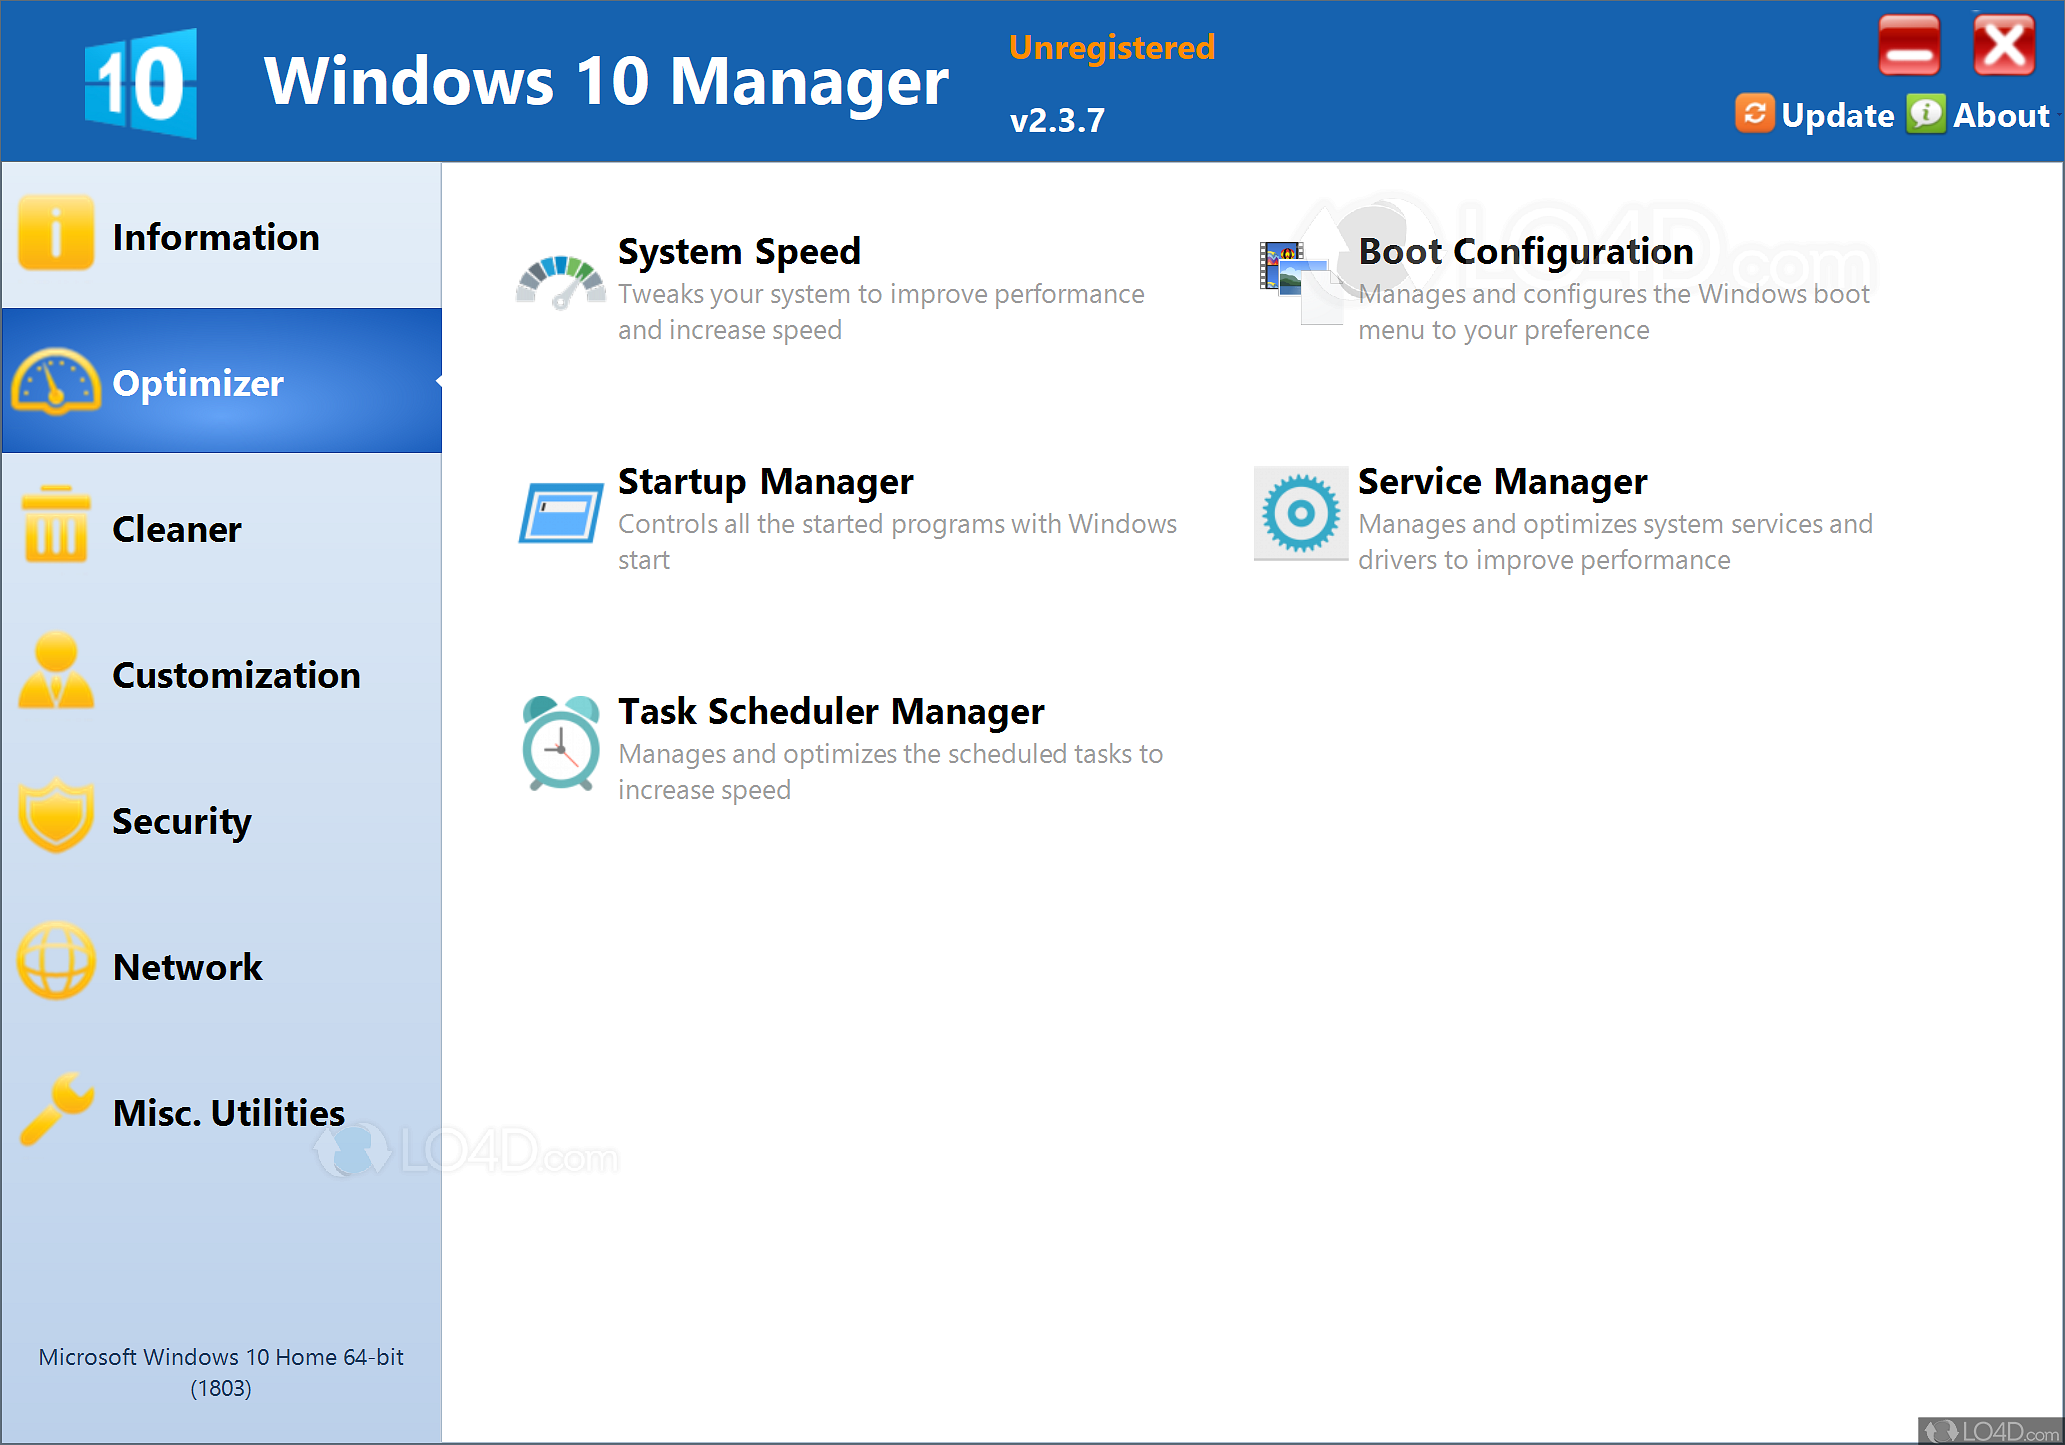 for android download Windows 10 Manager 3.8.2